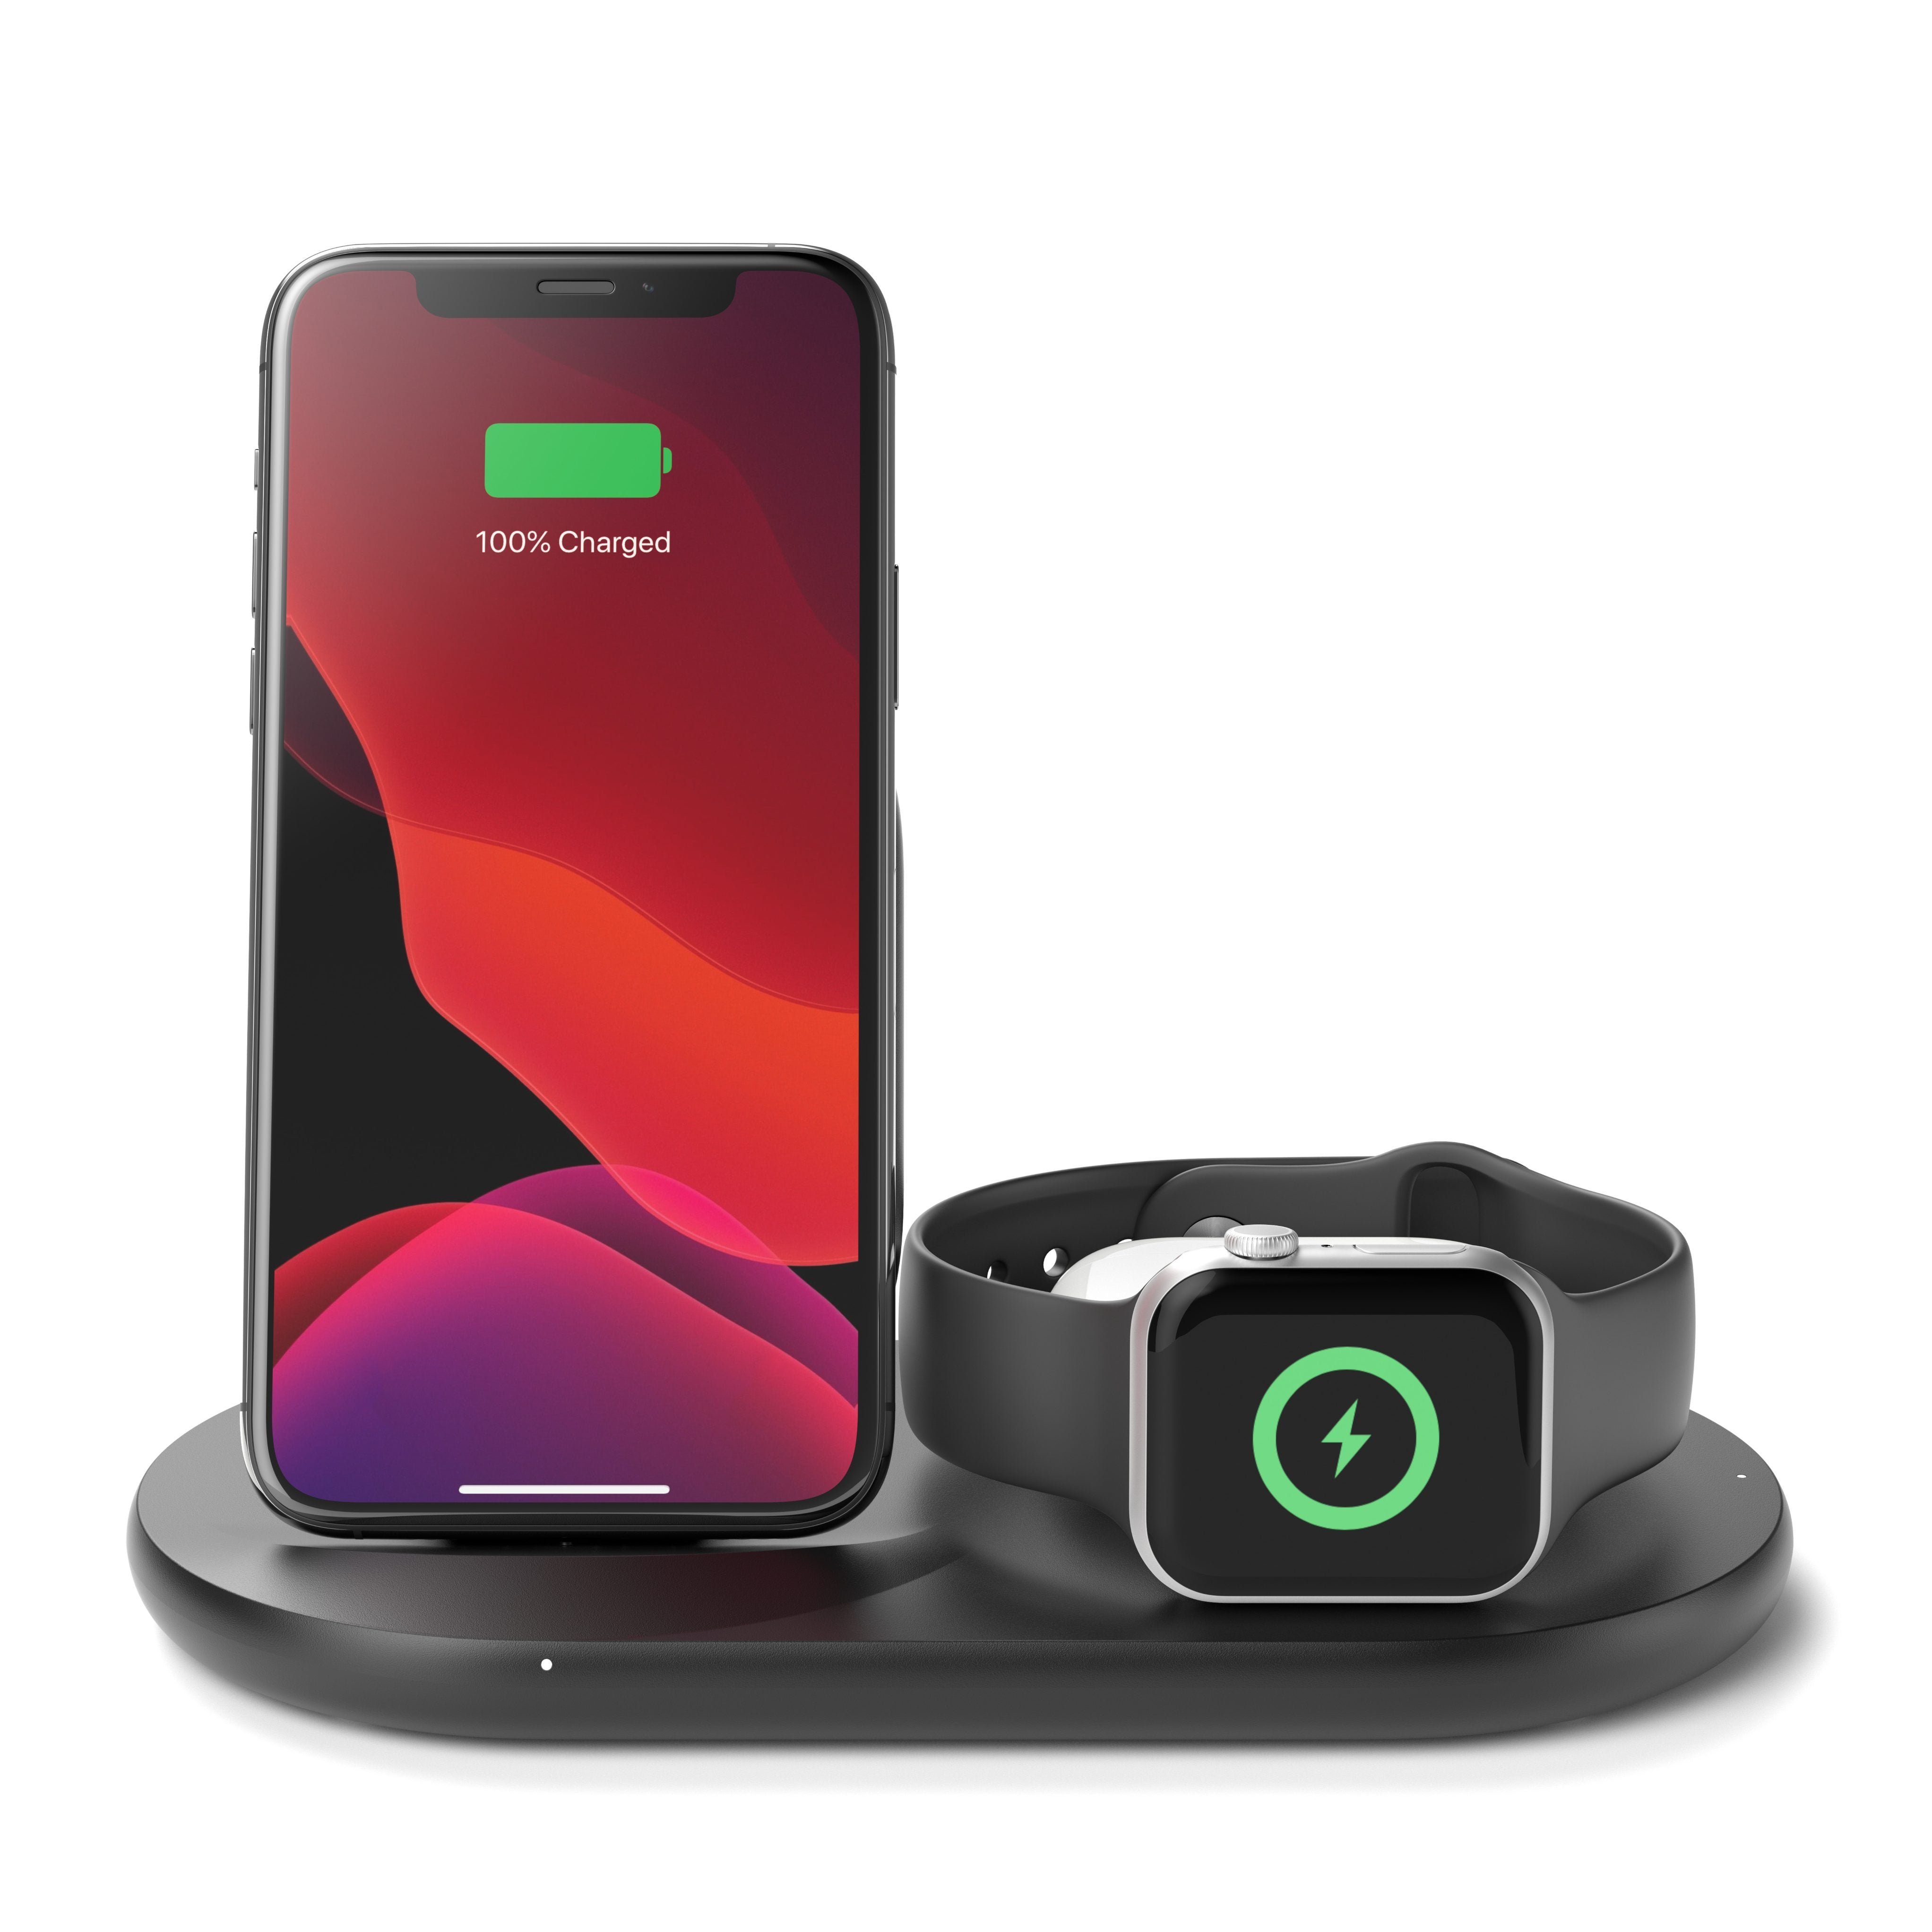 Belkin BOOST CHARGE 3-in-1 Wireless Charger - 10W Fast Qi Certified for iPhone 11/11Pro/ 11 Pro Max/Xs Max/XR/XS/X/8 Plus/8, Apple Watch Series 5/4/3/2/1 & Airpods Pro & QI enabled devices - Black